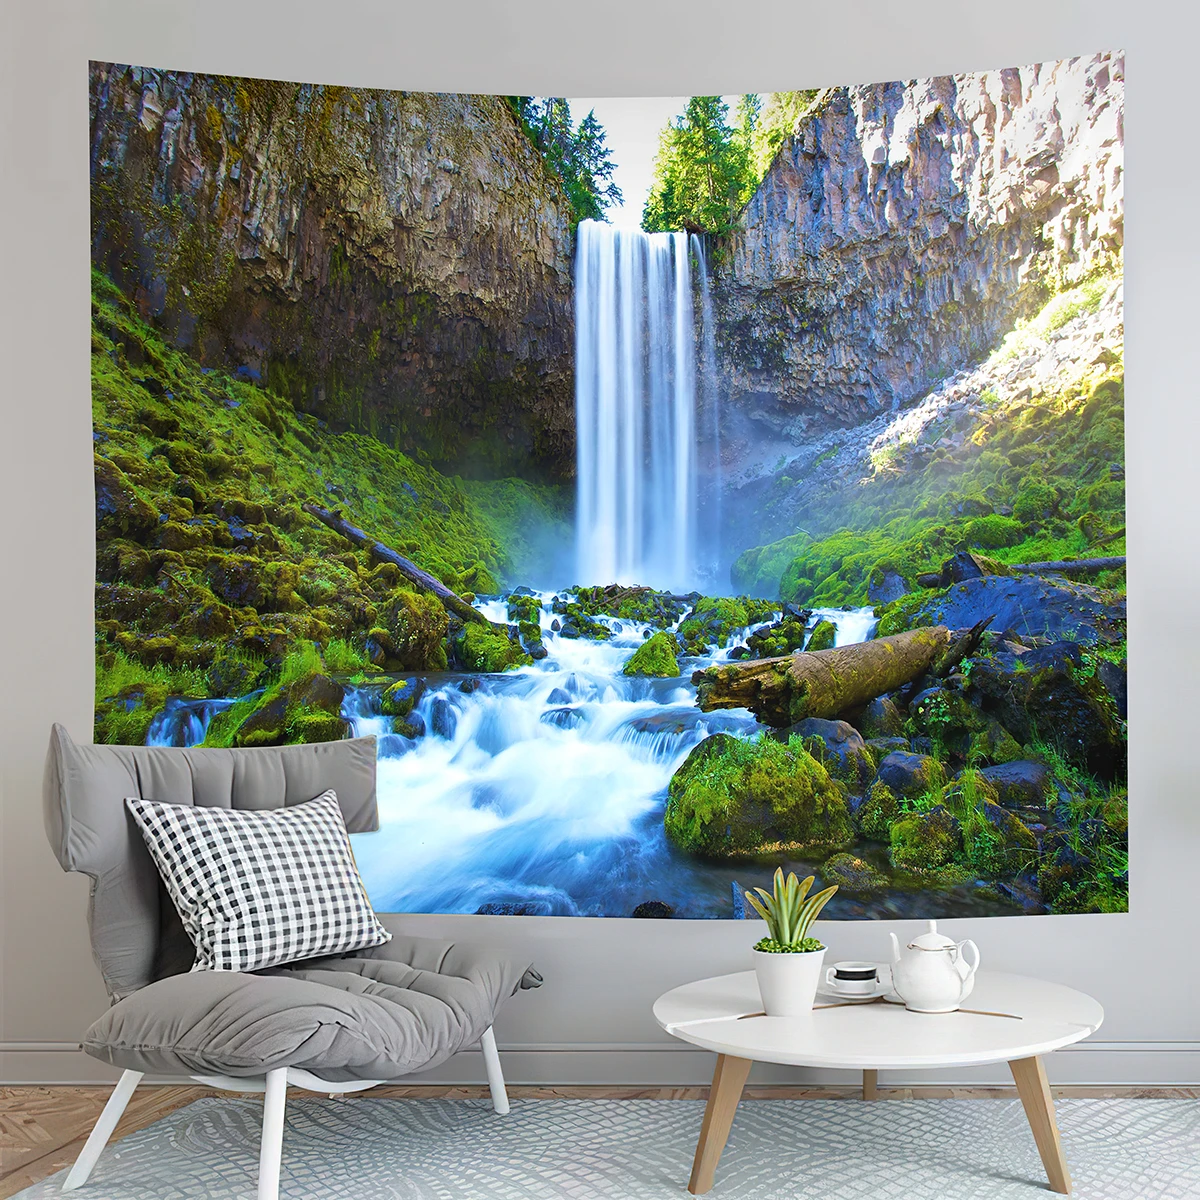 

Waterfall Tapestry Tropical Forest Tapestry Green Natural Landscape Tapestry Living Room Bedroom Dorm Wall Hanging Decor Blanket